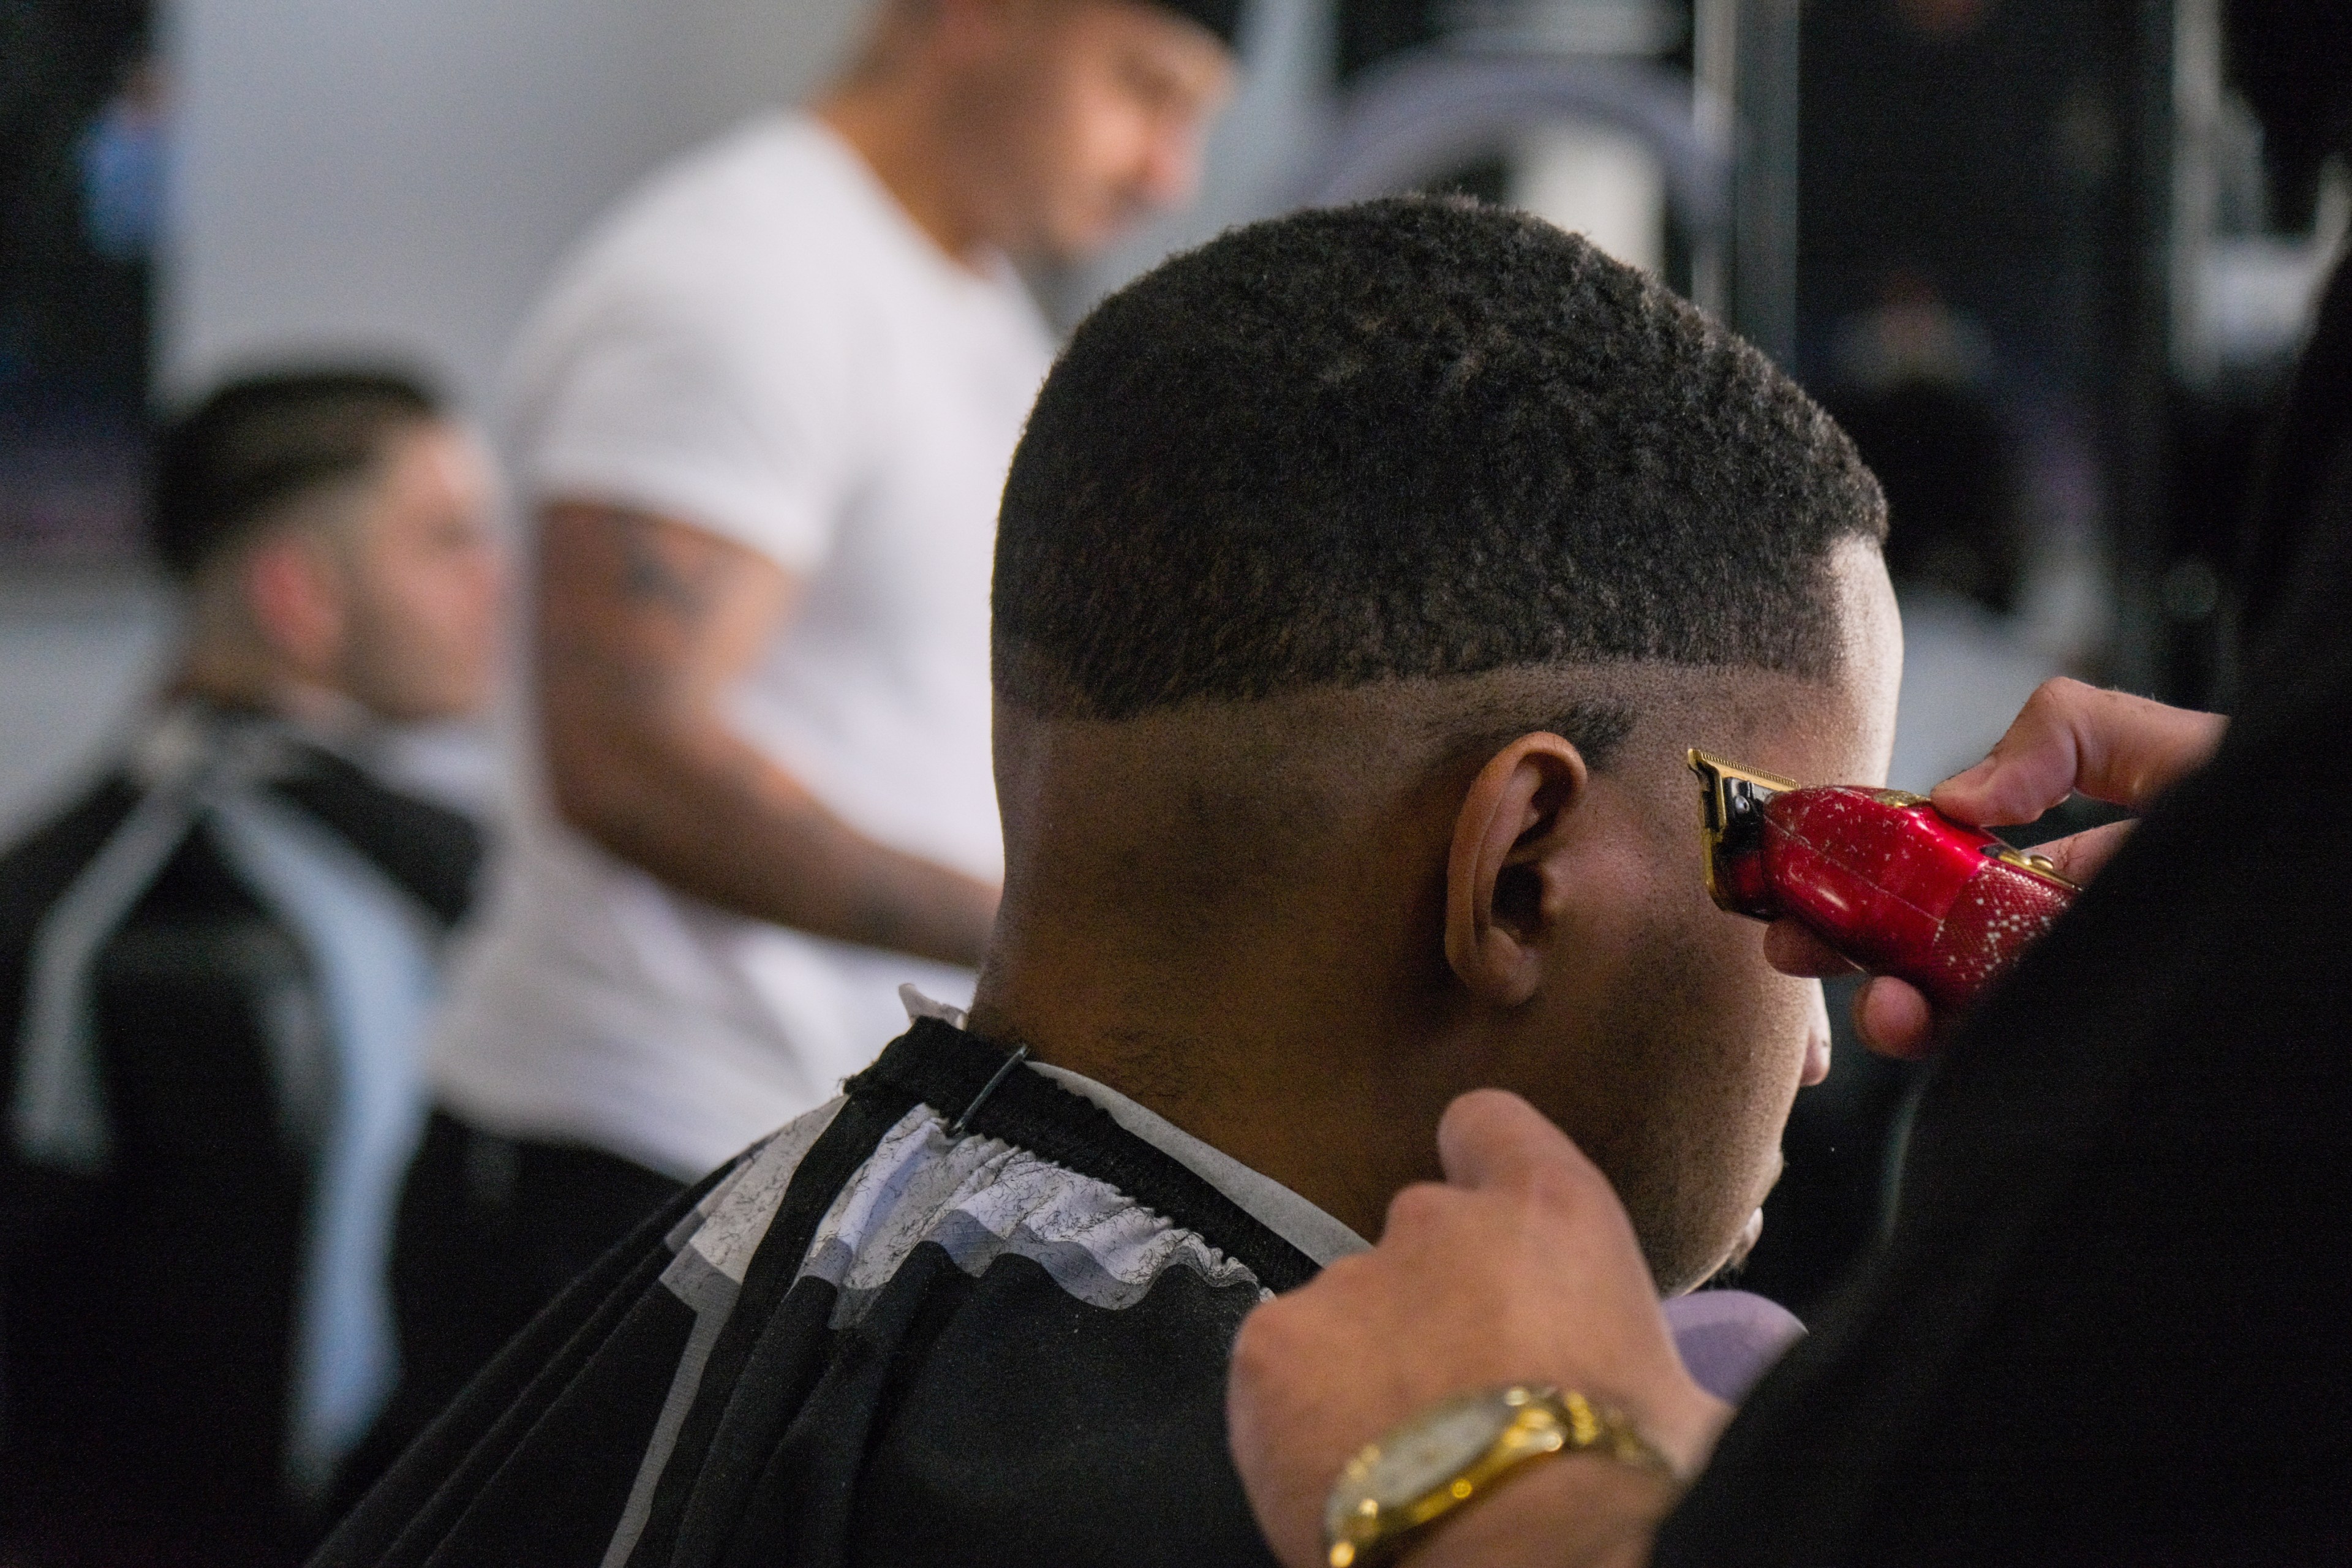 A barber uses red clippers to trim a man's hairline; another customer and barber are blurry in the background.